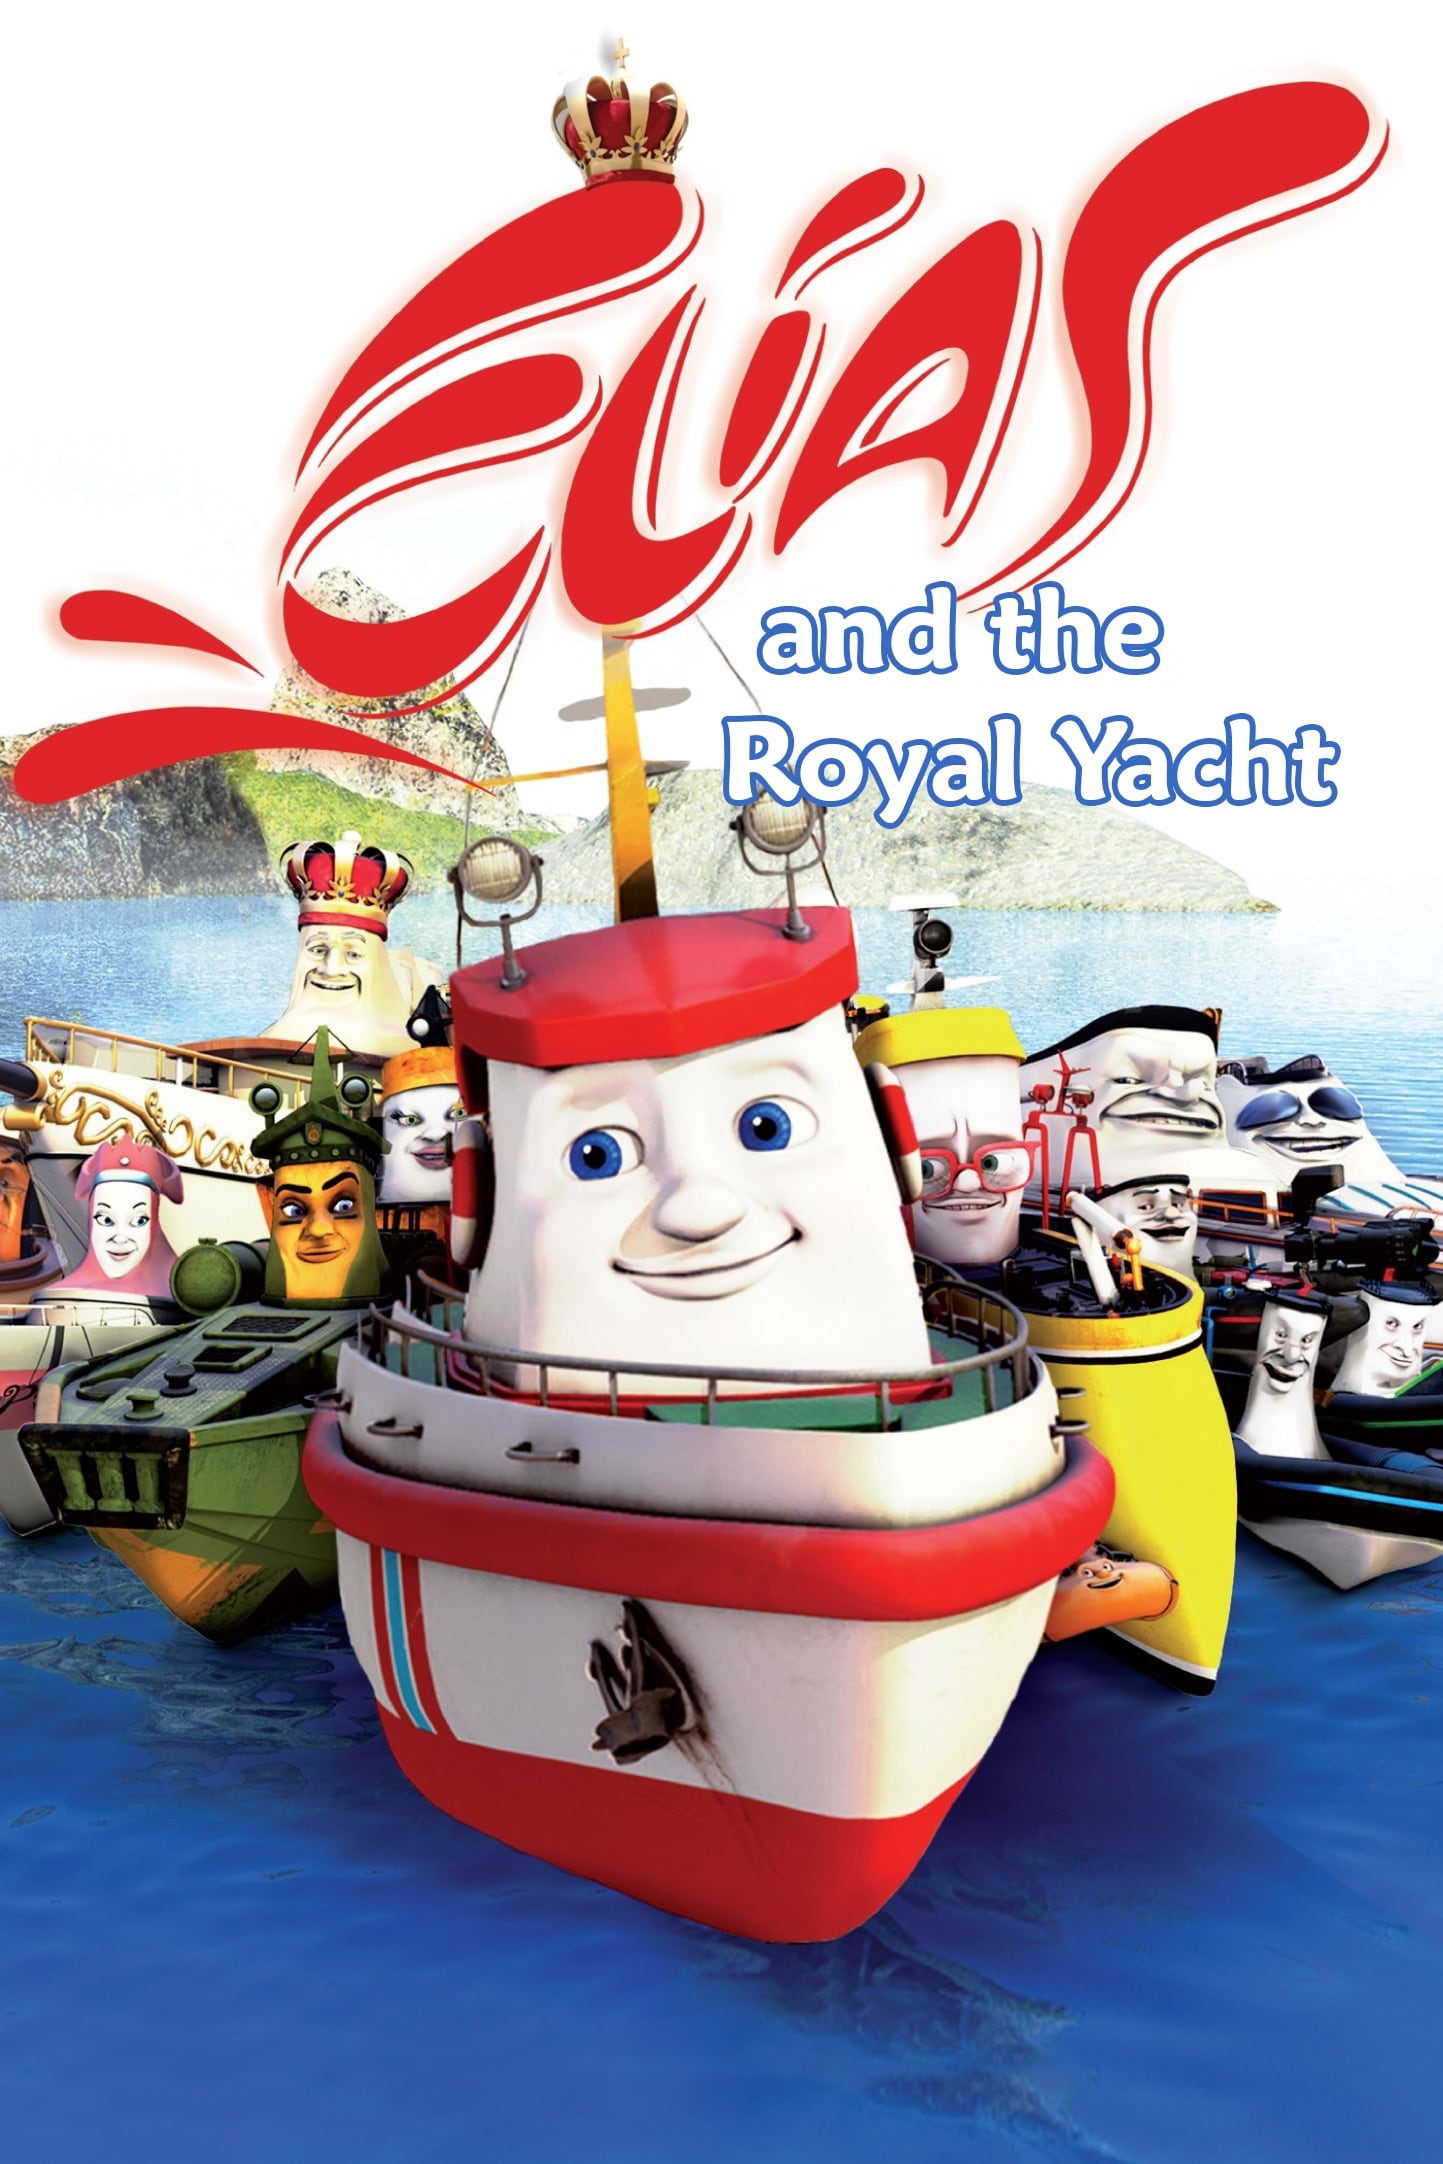 Elias and the Royal Yacht (2007)